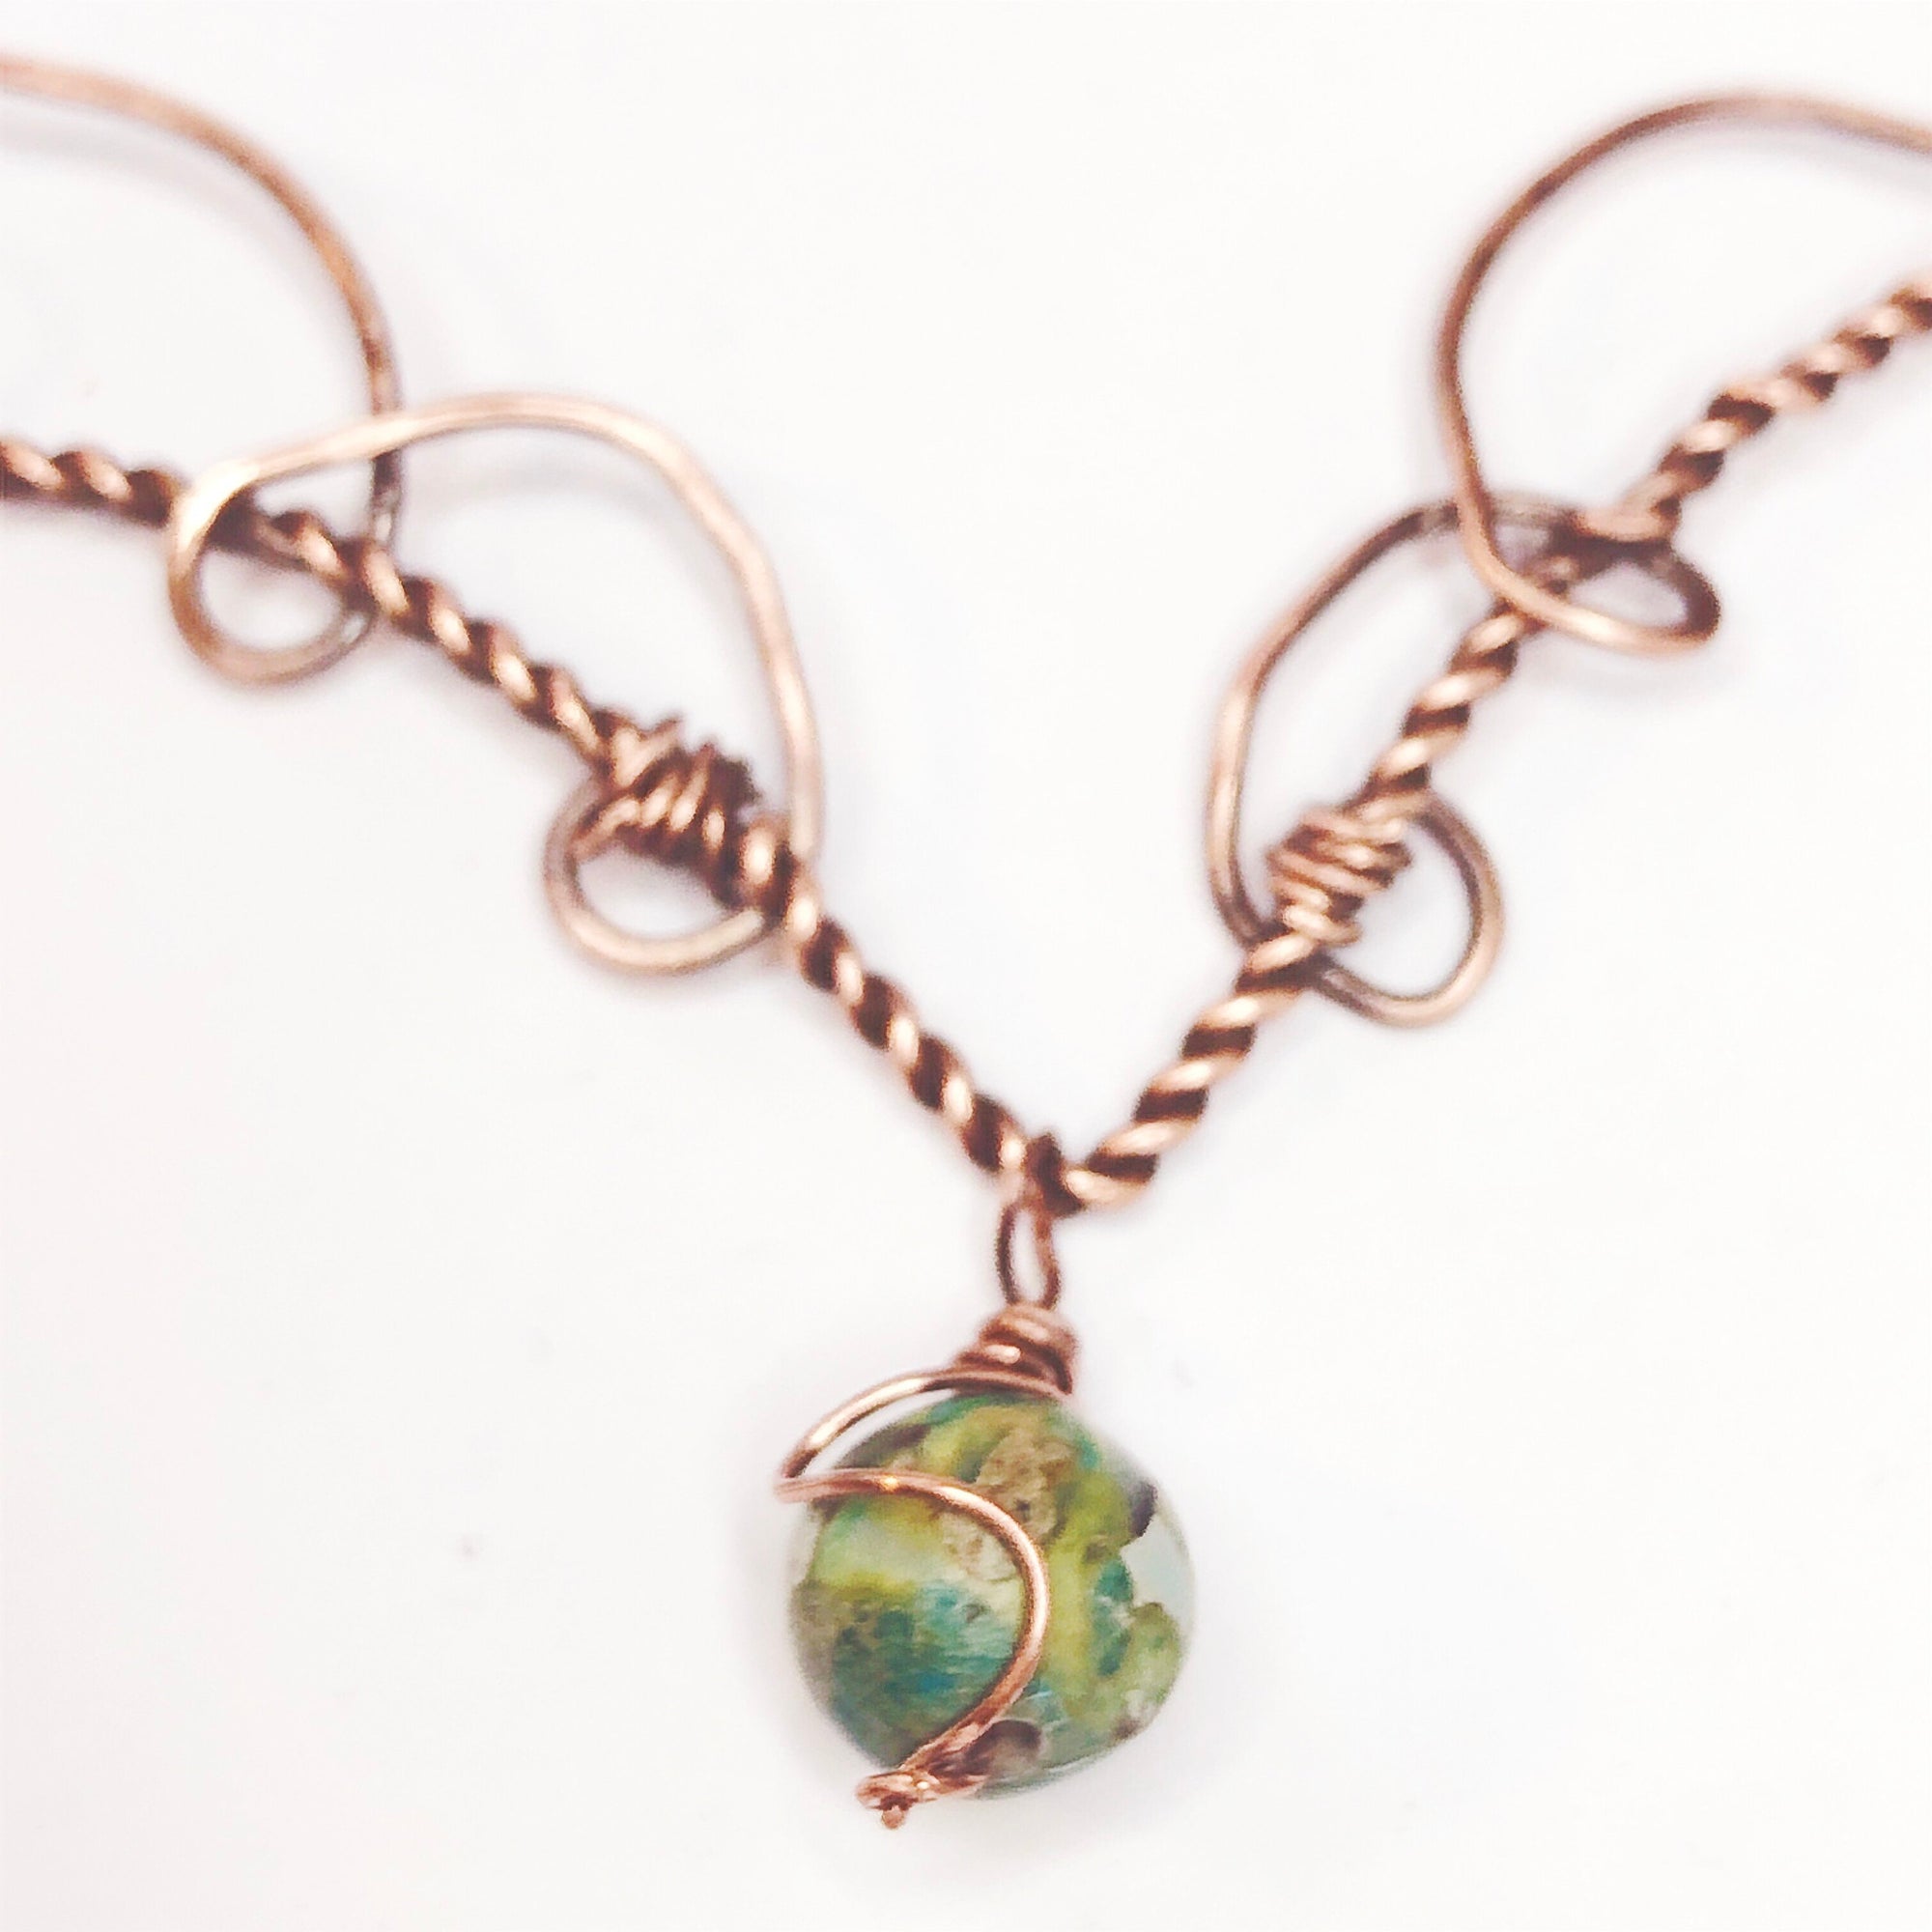 Elvish Fairycore nature inspired necklace with Imperial Jasper stone accent